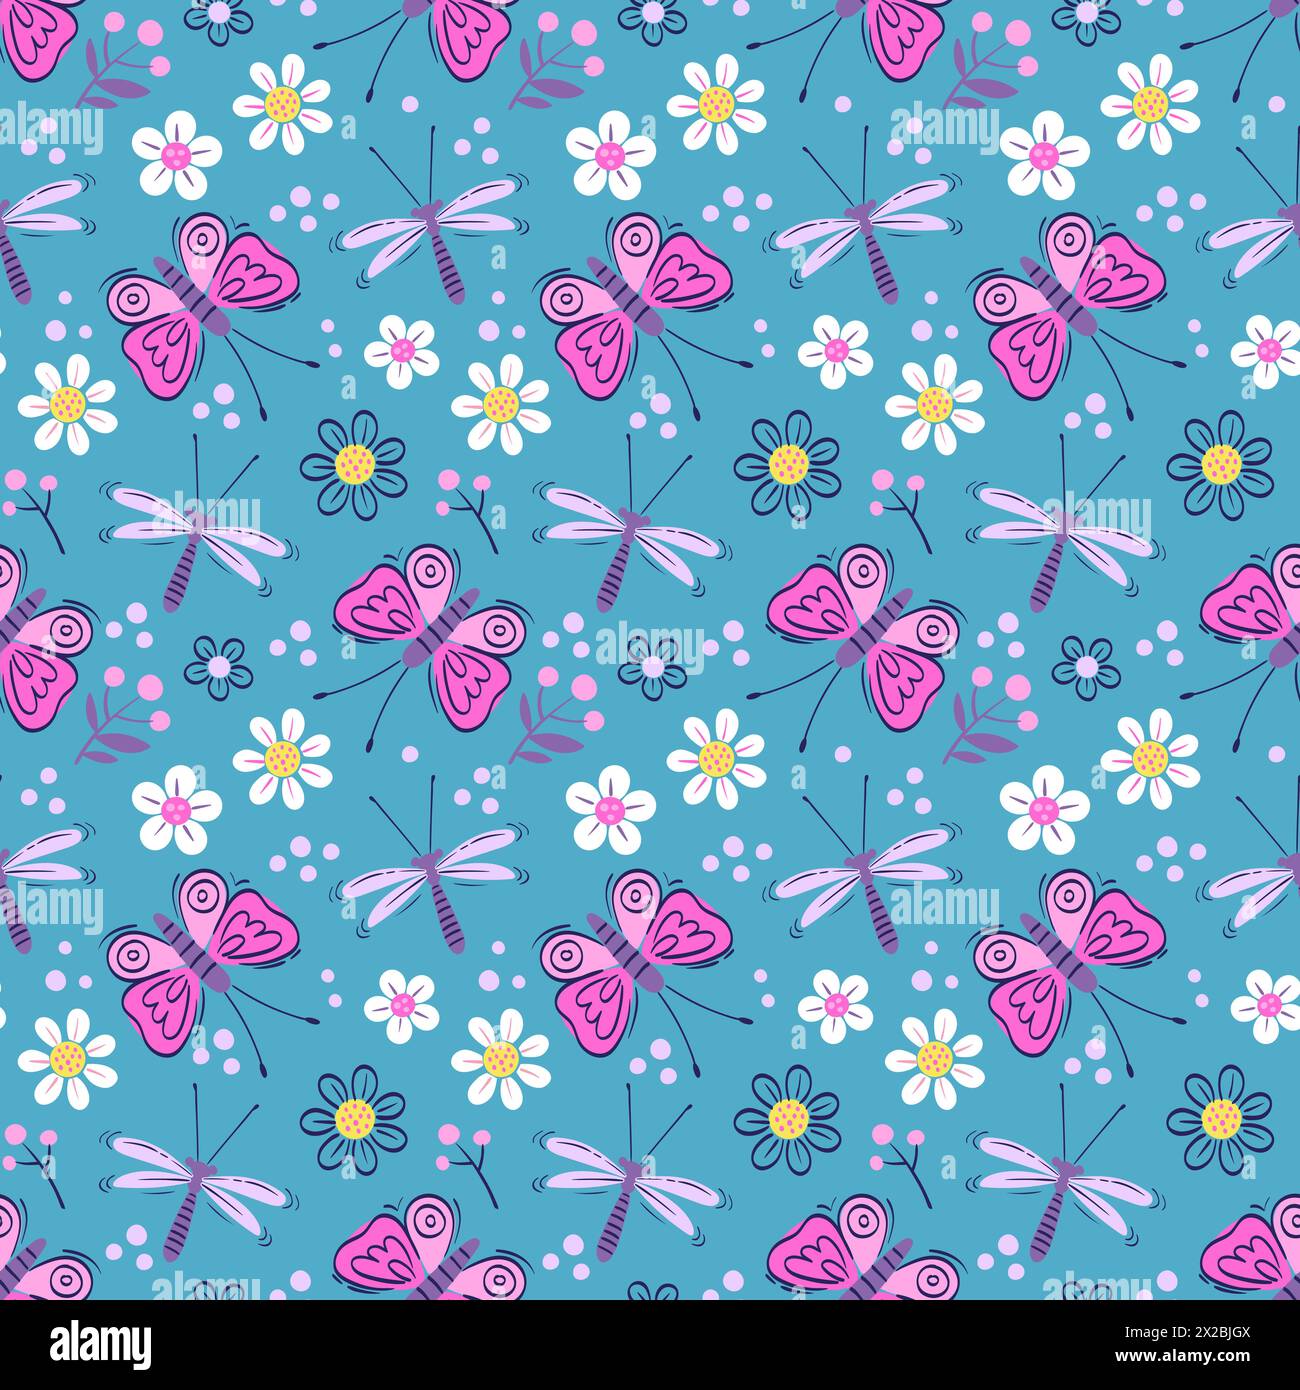 Vector seamless pattern of with butterflies and dragonflies. Stylized insects and flowers on a blue background Stock Vector